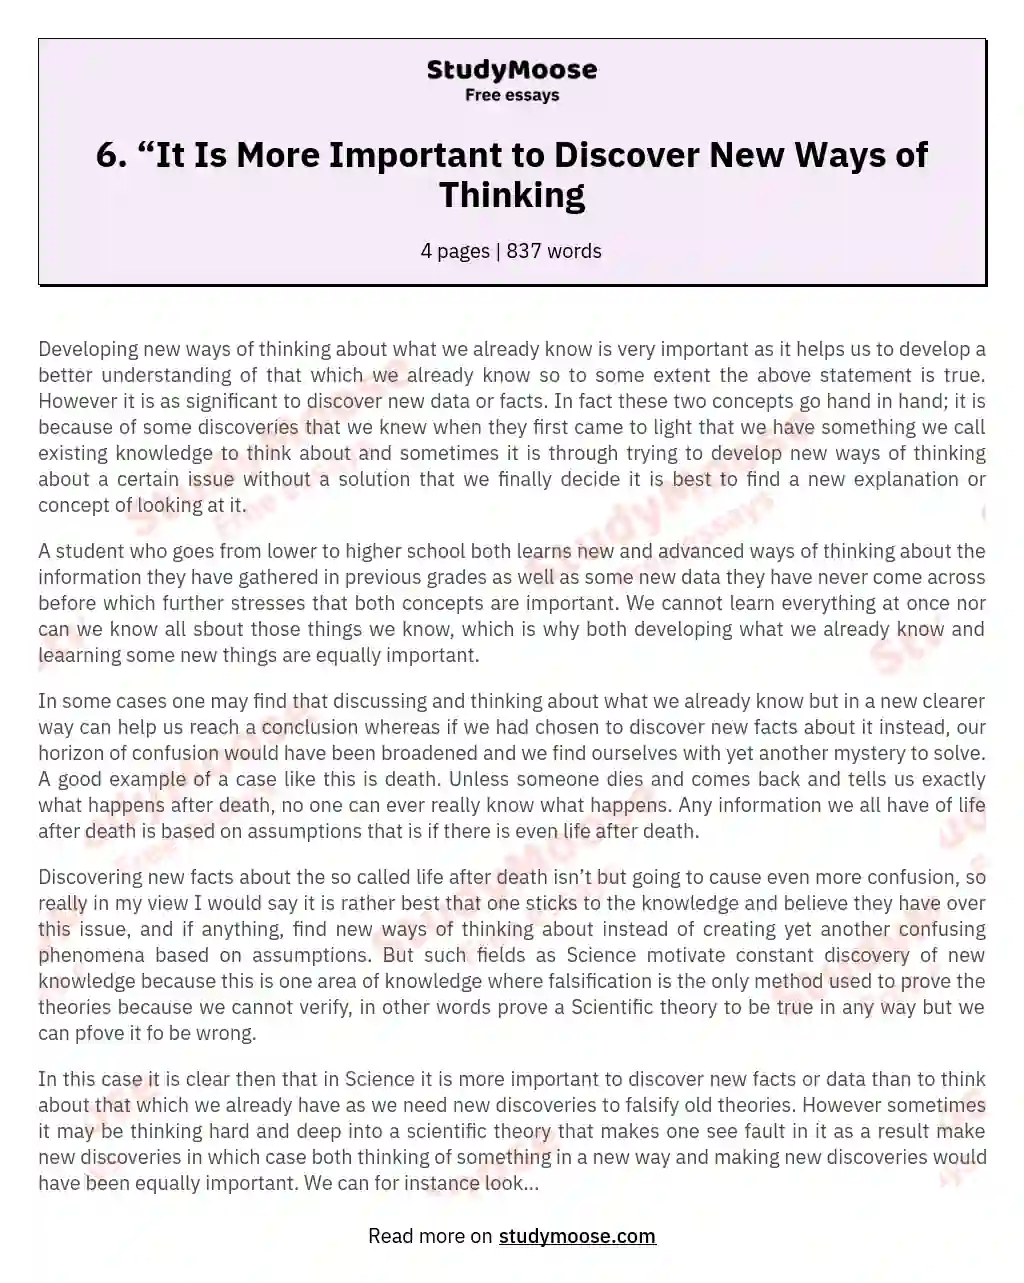 6. “It Is More Important to Discover New Ways of Thinking